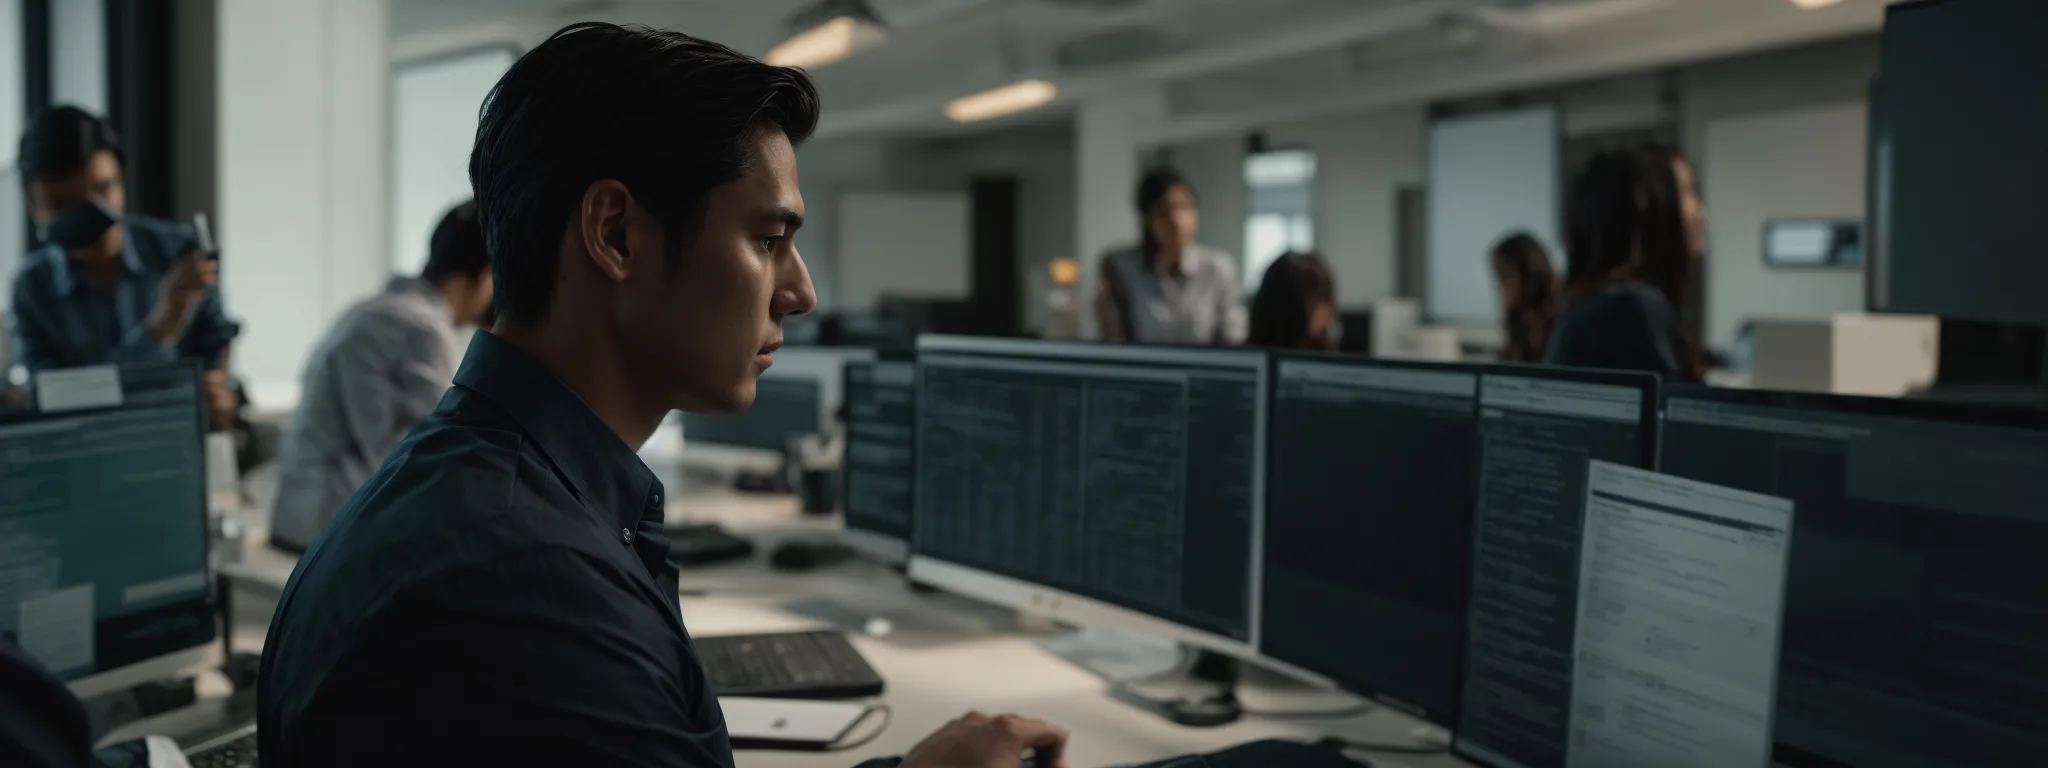 a scene depicting a stern-faced business professional intently examining an seo agency's portfolio on a computer screen in a modern, well-lit office.